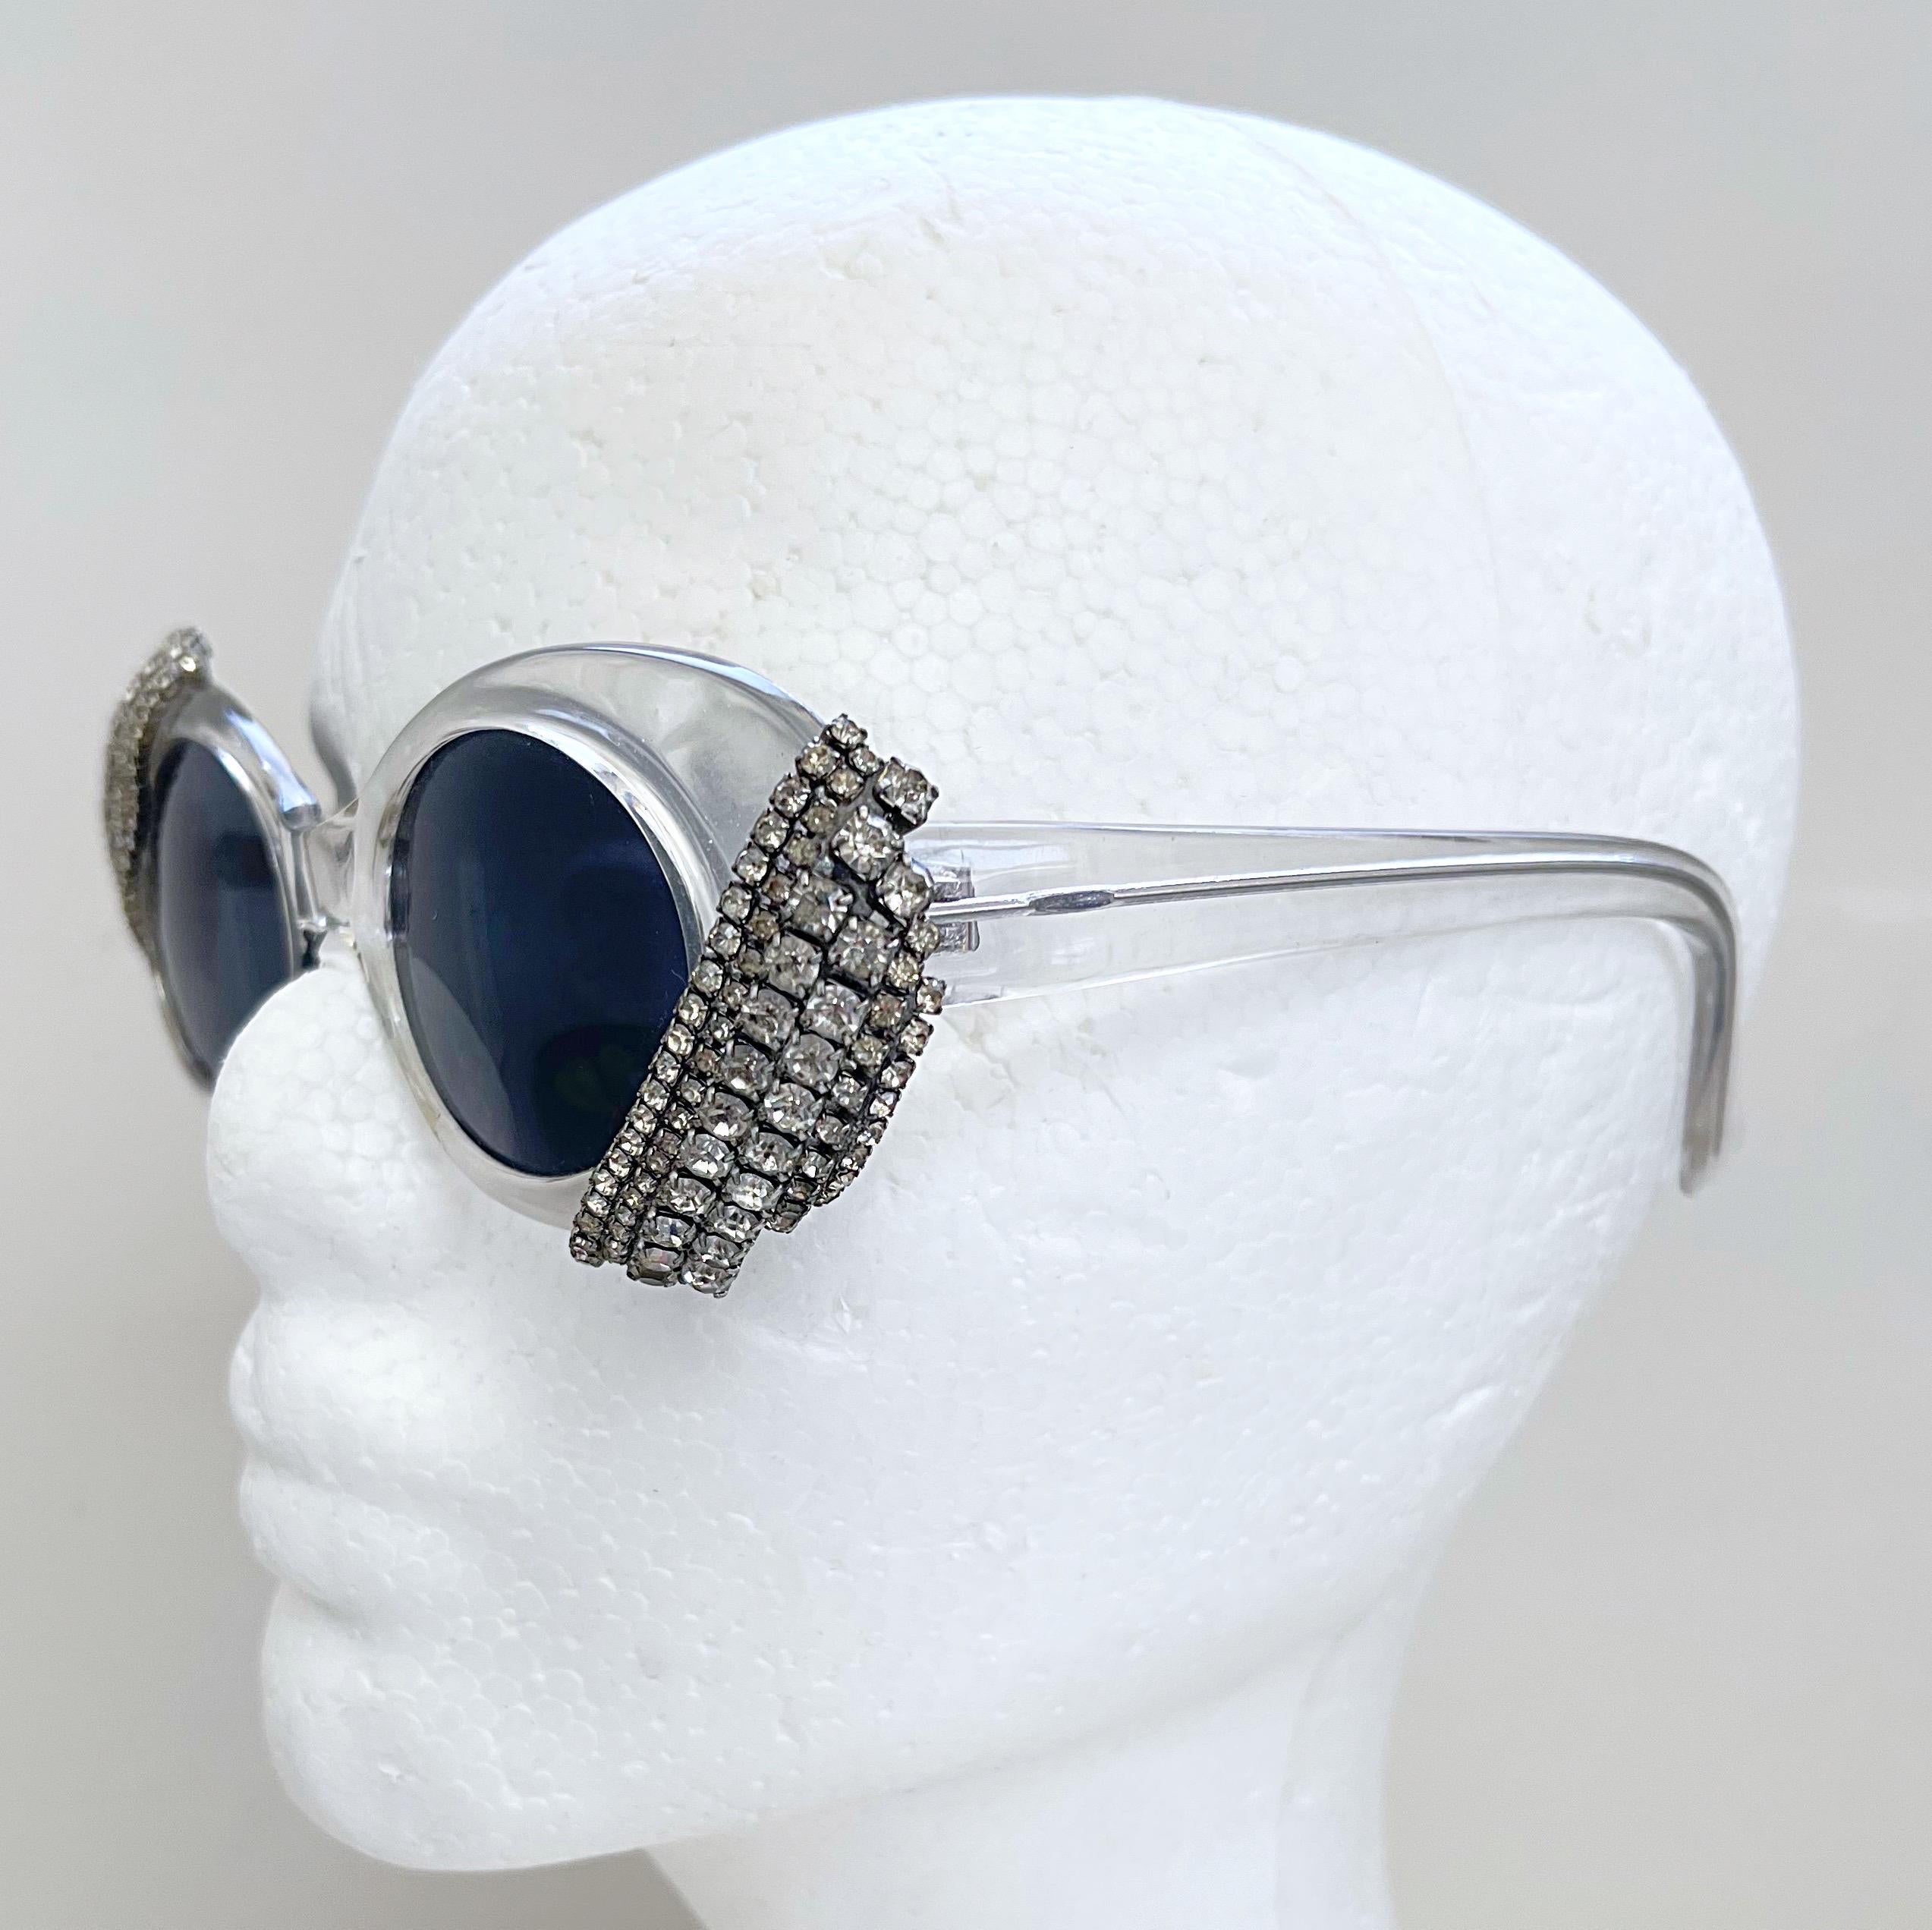 Super rare, and Rihanna favorite, MERCURA NYC novelty sunglasses ! These glasses are everything ! Jackie O oval shape with clear lucite. Rhinestones at each upper and lower corner. Great for any size face shape. Hand made in 
New York City
In great